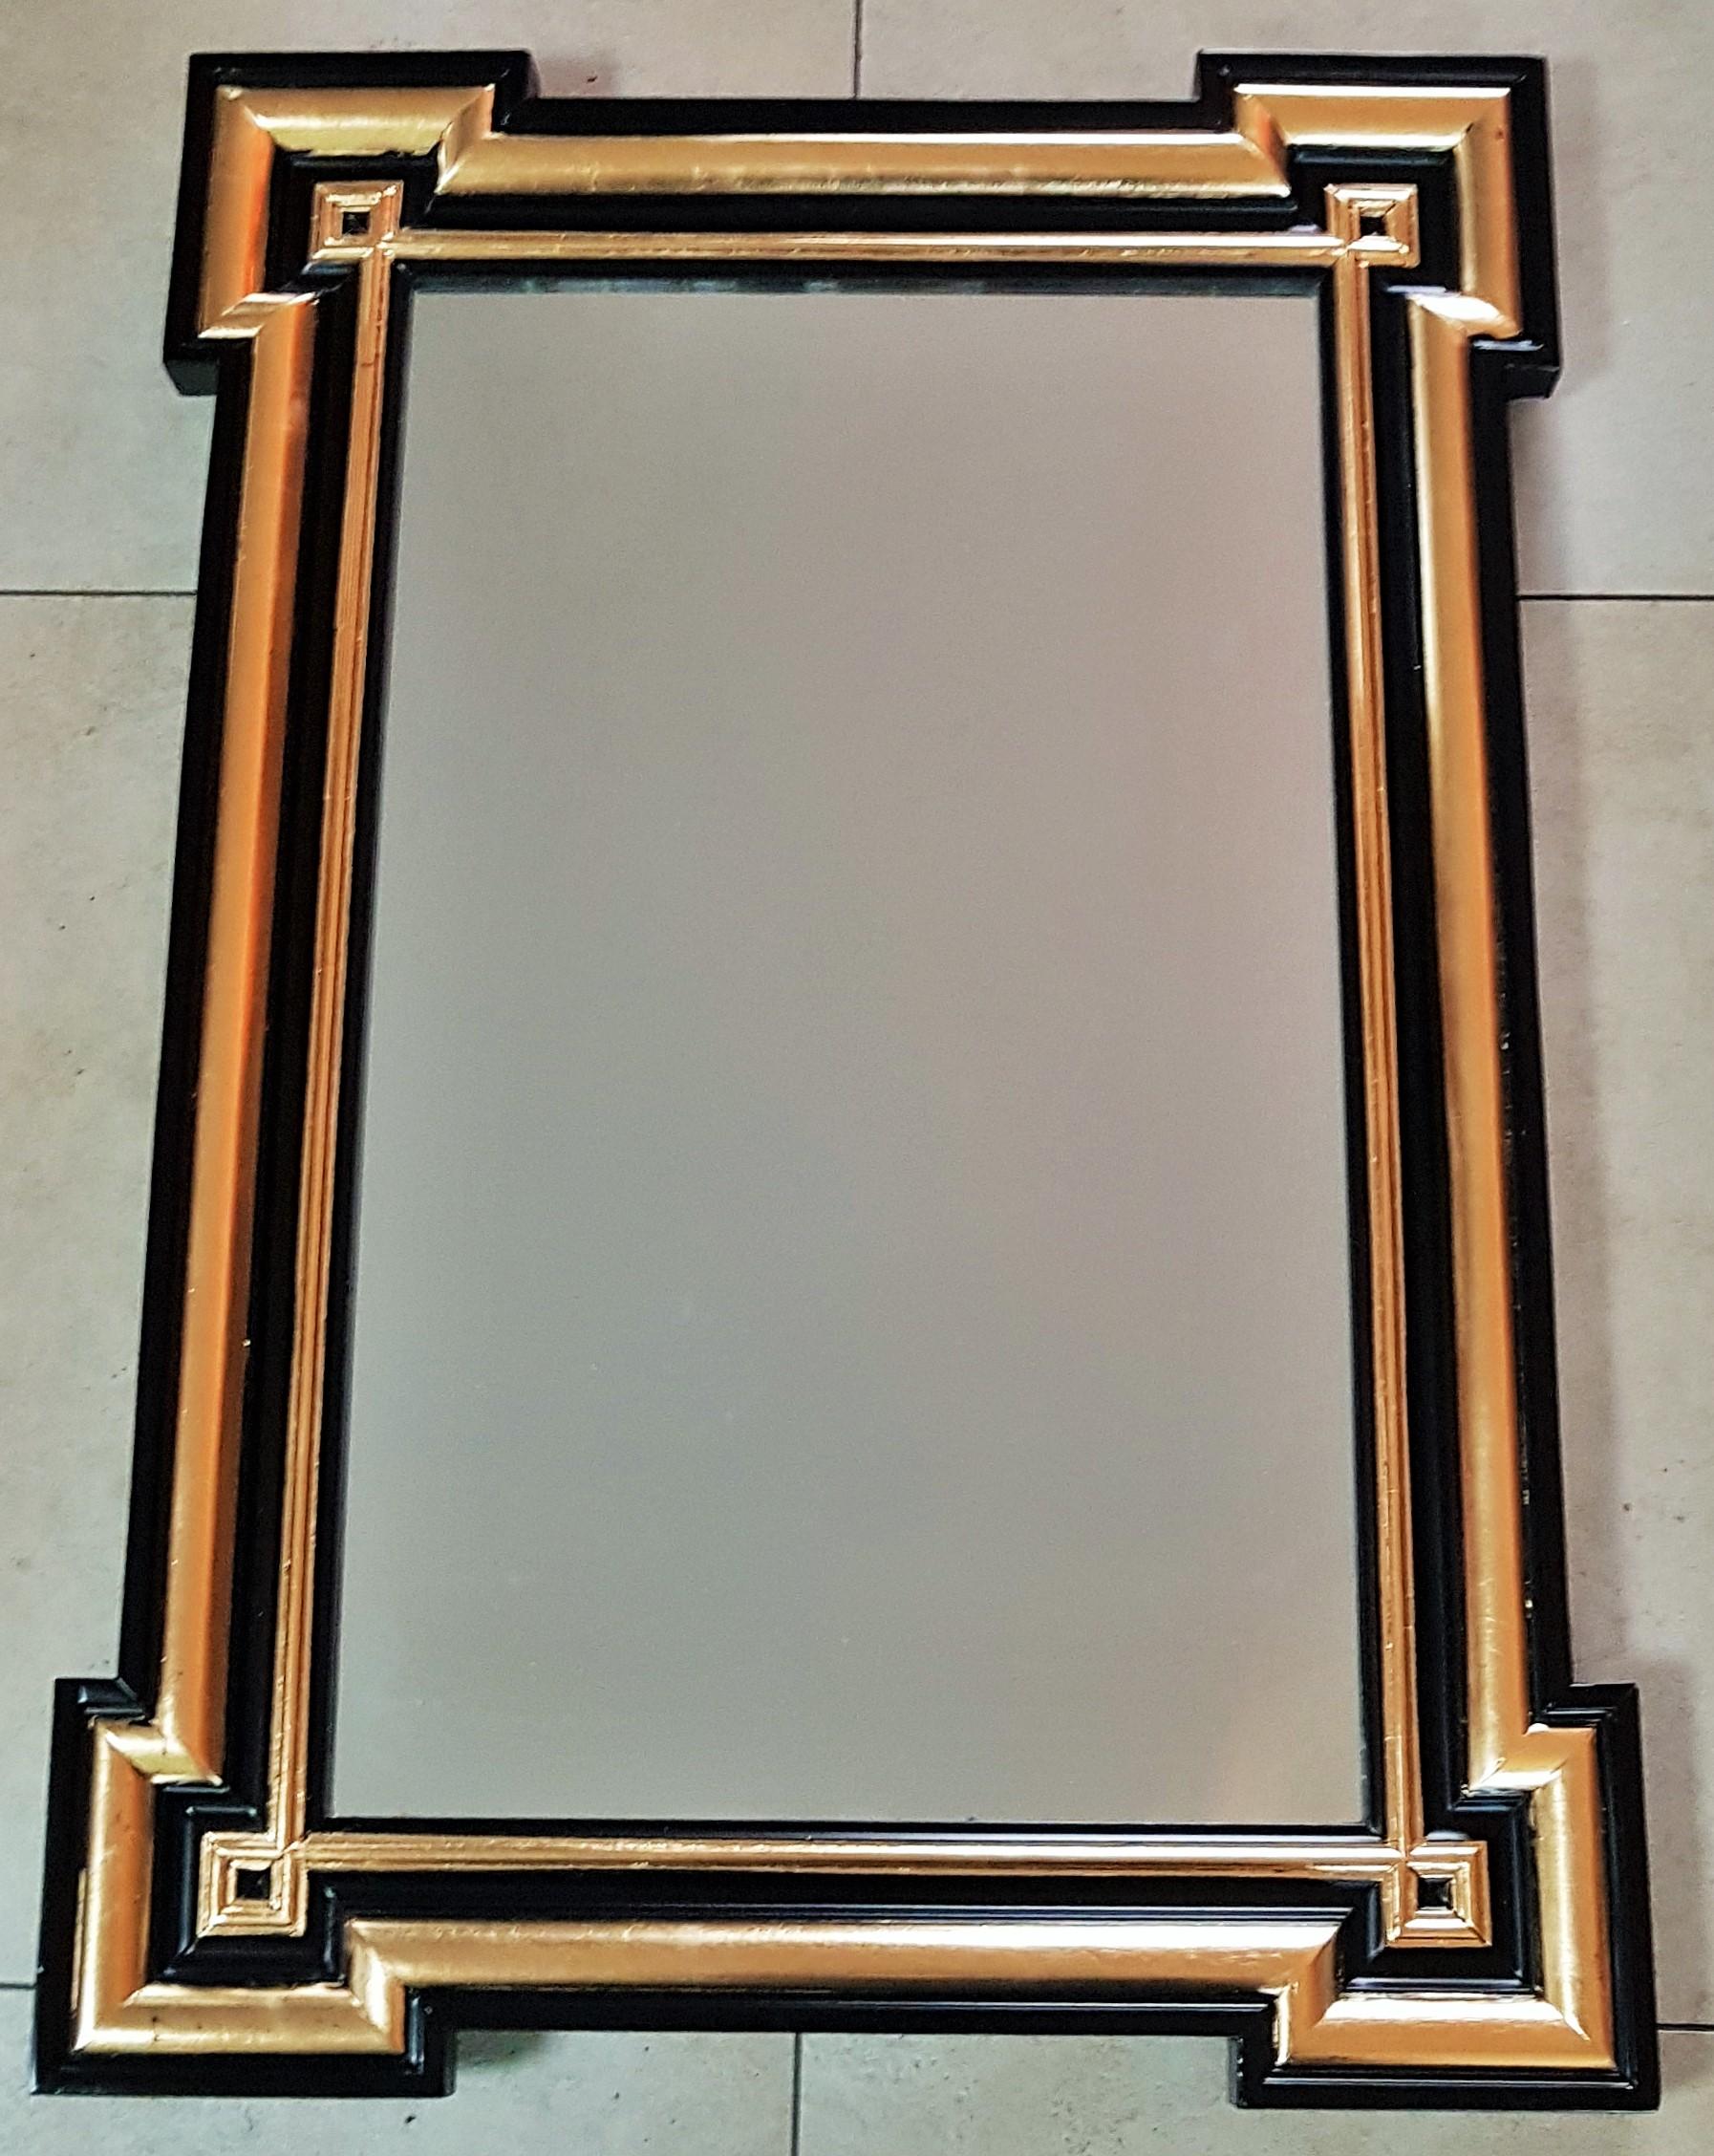 Napoleon III period black and gold mirror, France 1860.

Black lacquer, gold leaf.